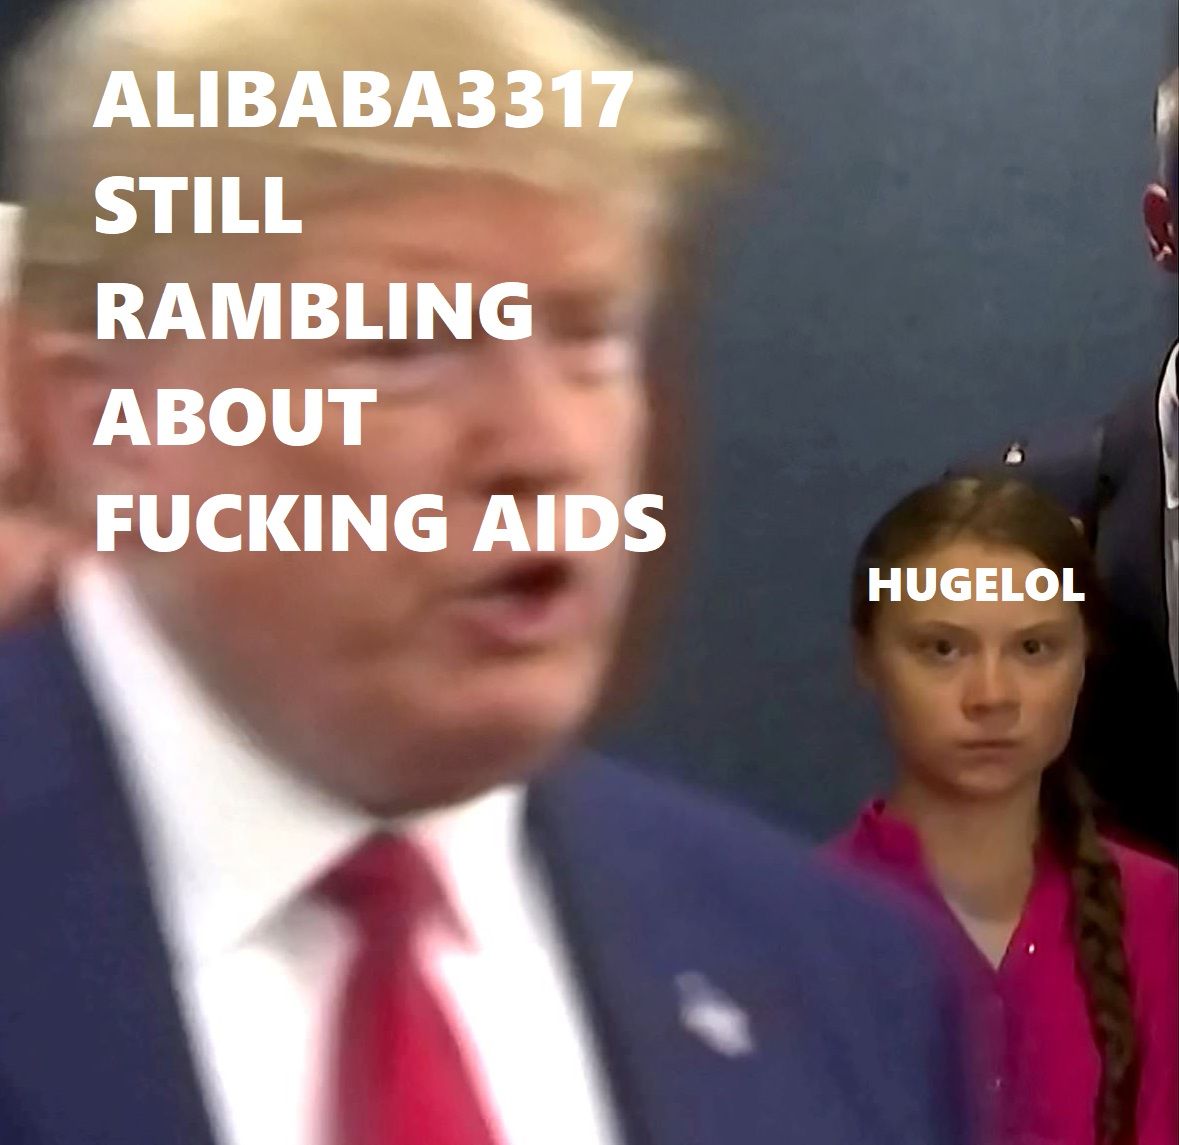 "Oh, f@ck here he goes with this AIDS propaganda again" - Hugelol